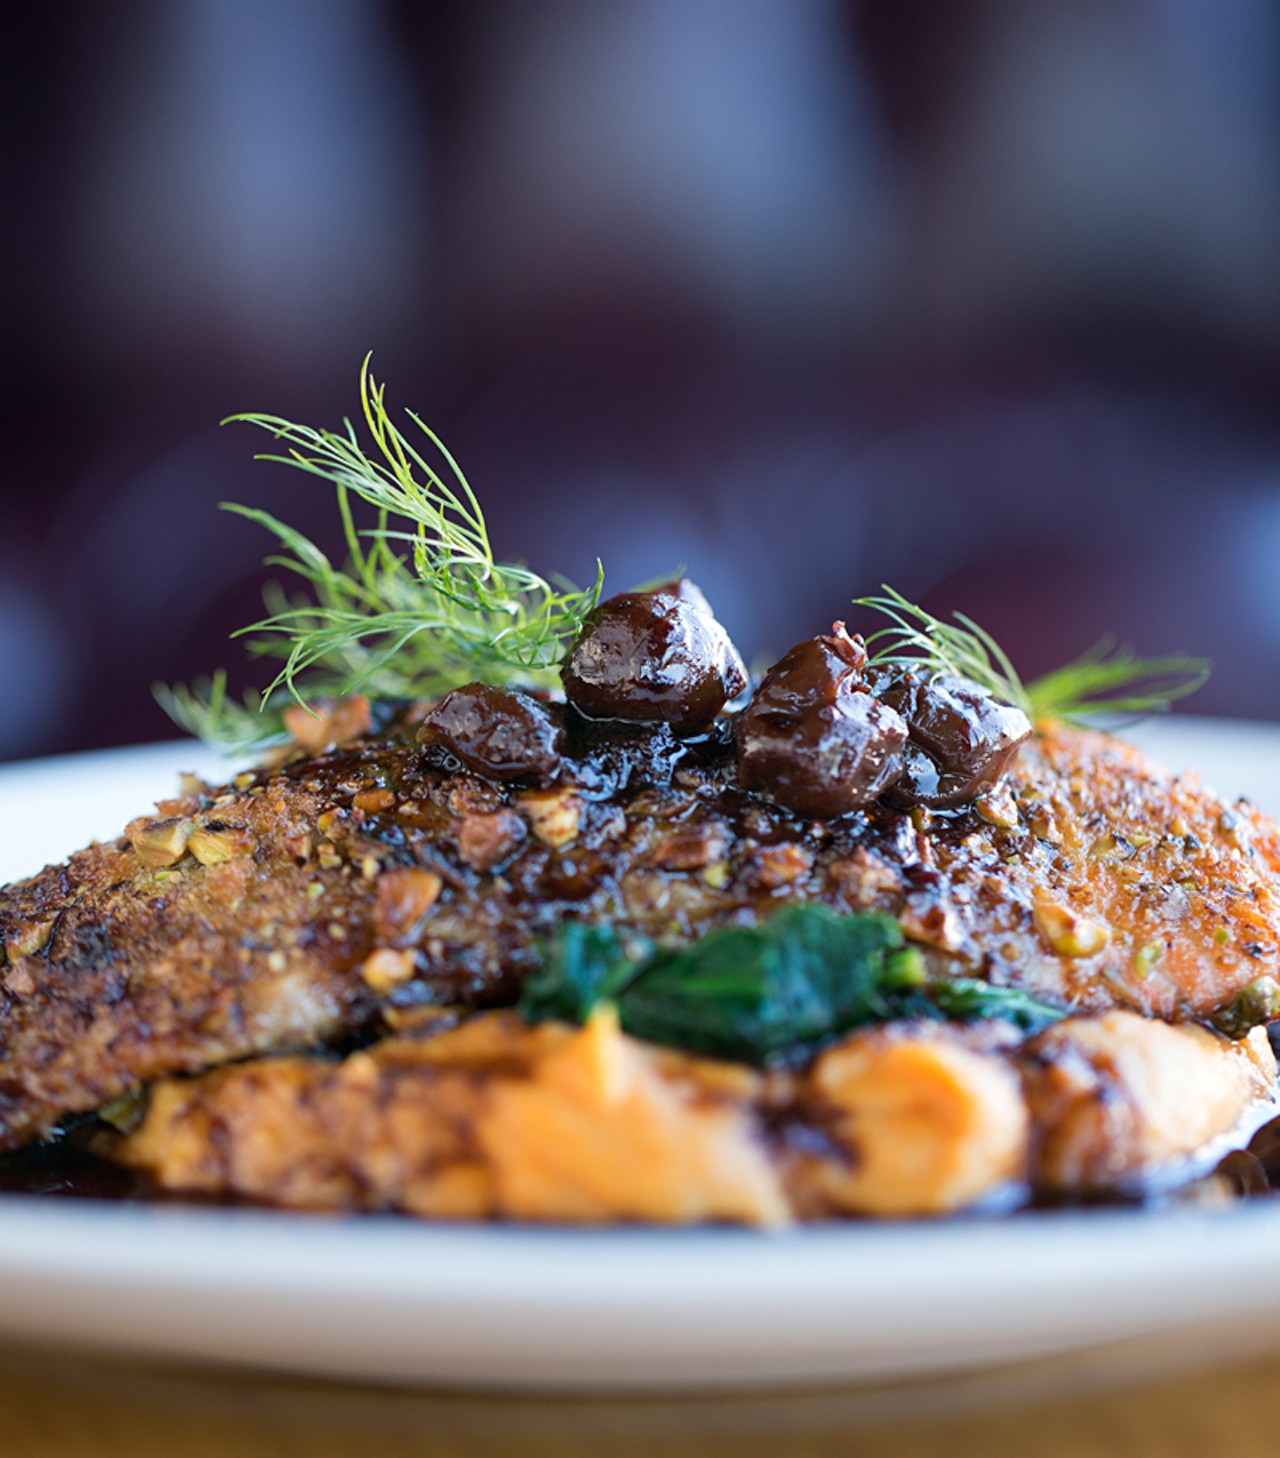 Pistachio-encrusted salmon with a sweet potato puree, served with sauteed spinach and a cherry-red wine sauce.